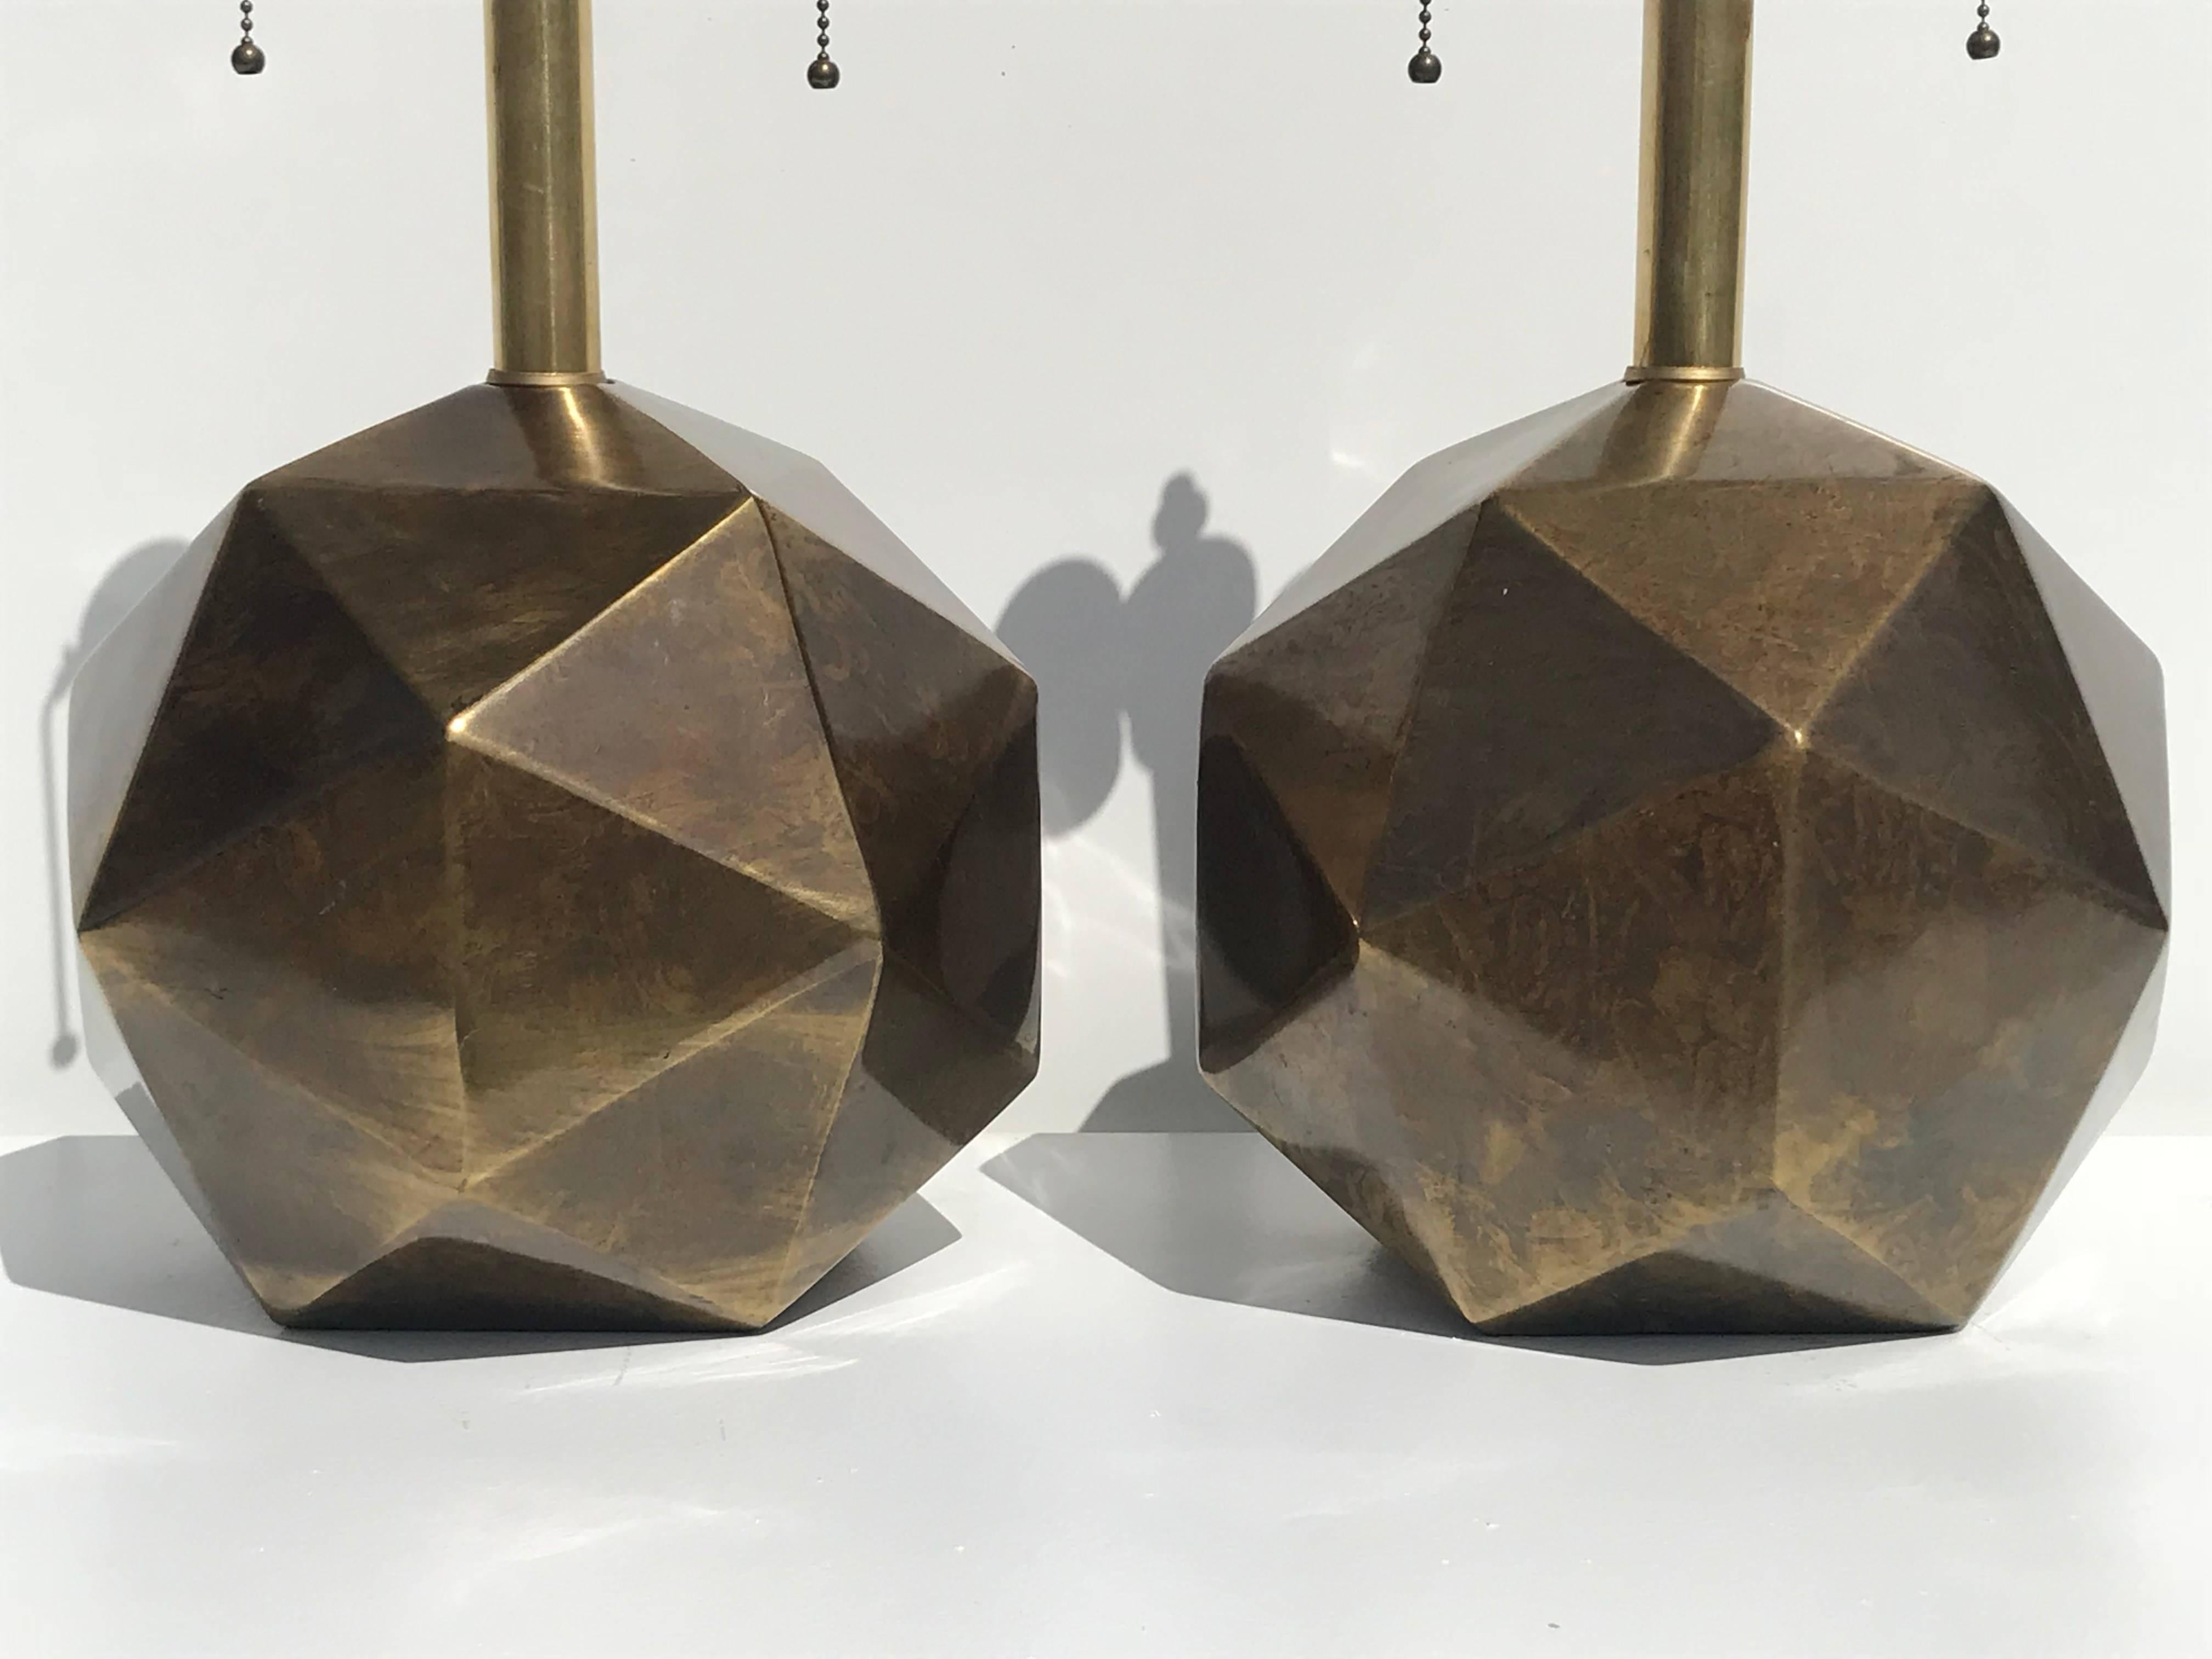 Pair of Westwood Industries geometric faceted lamps in antique bronze finish. Main body is 10